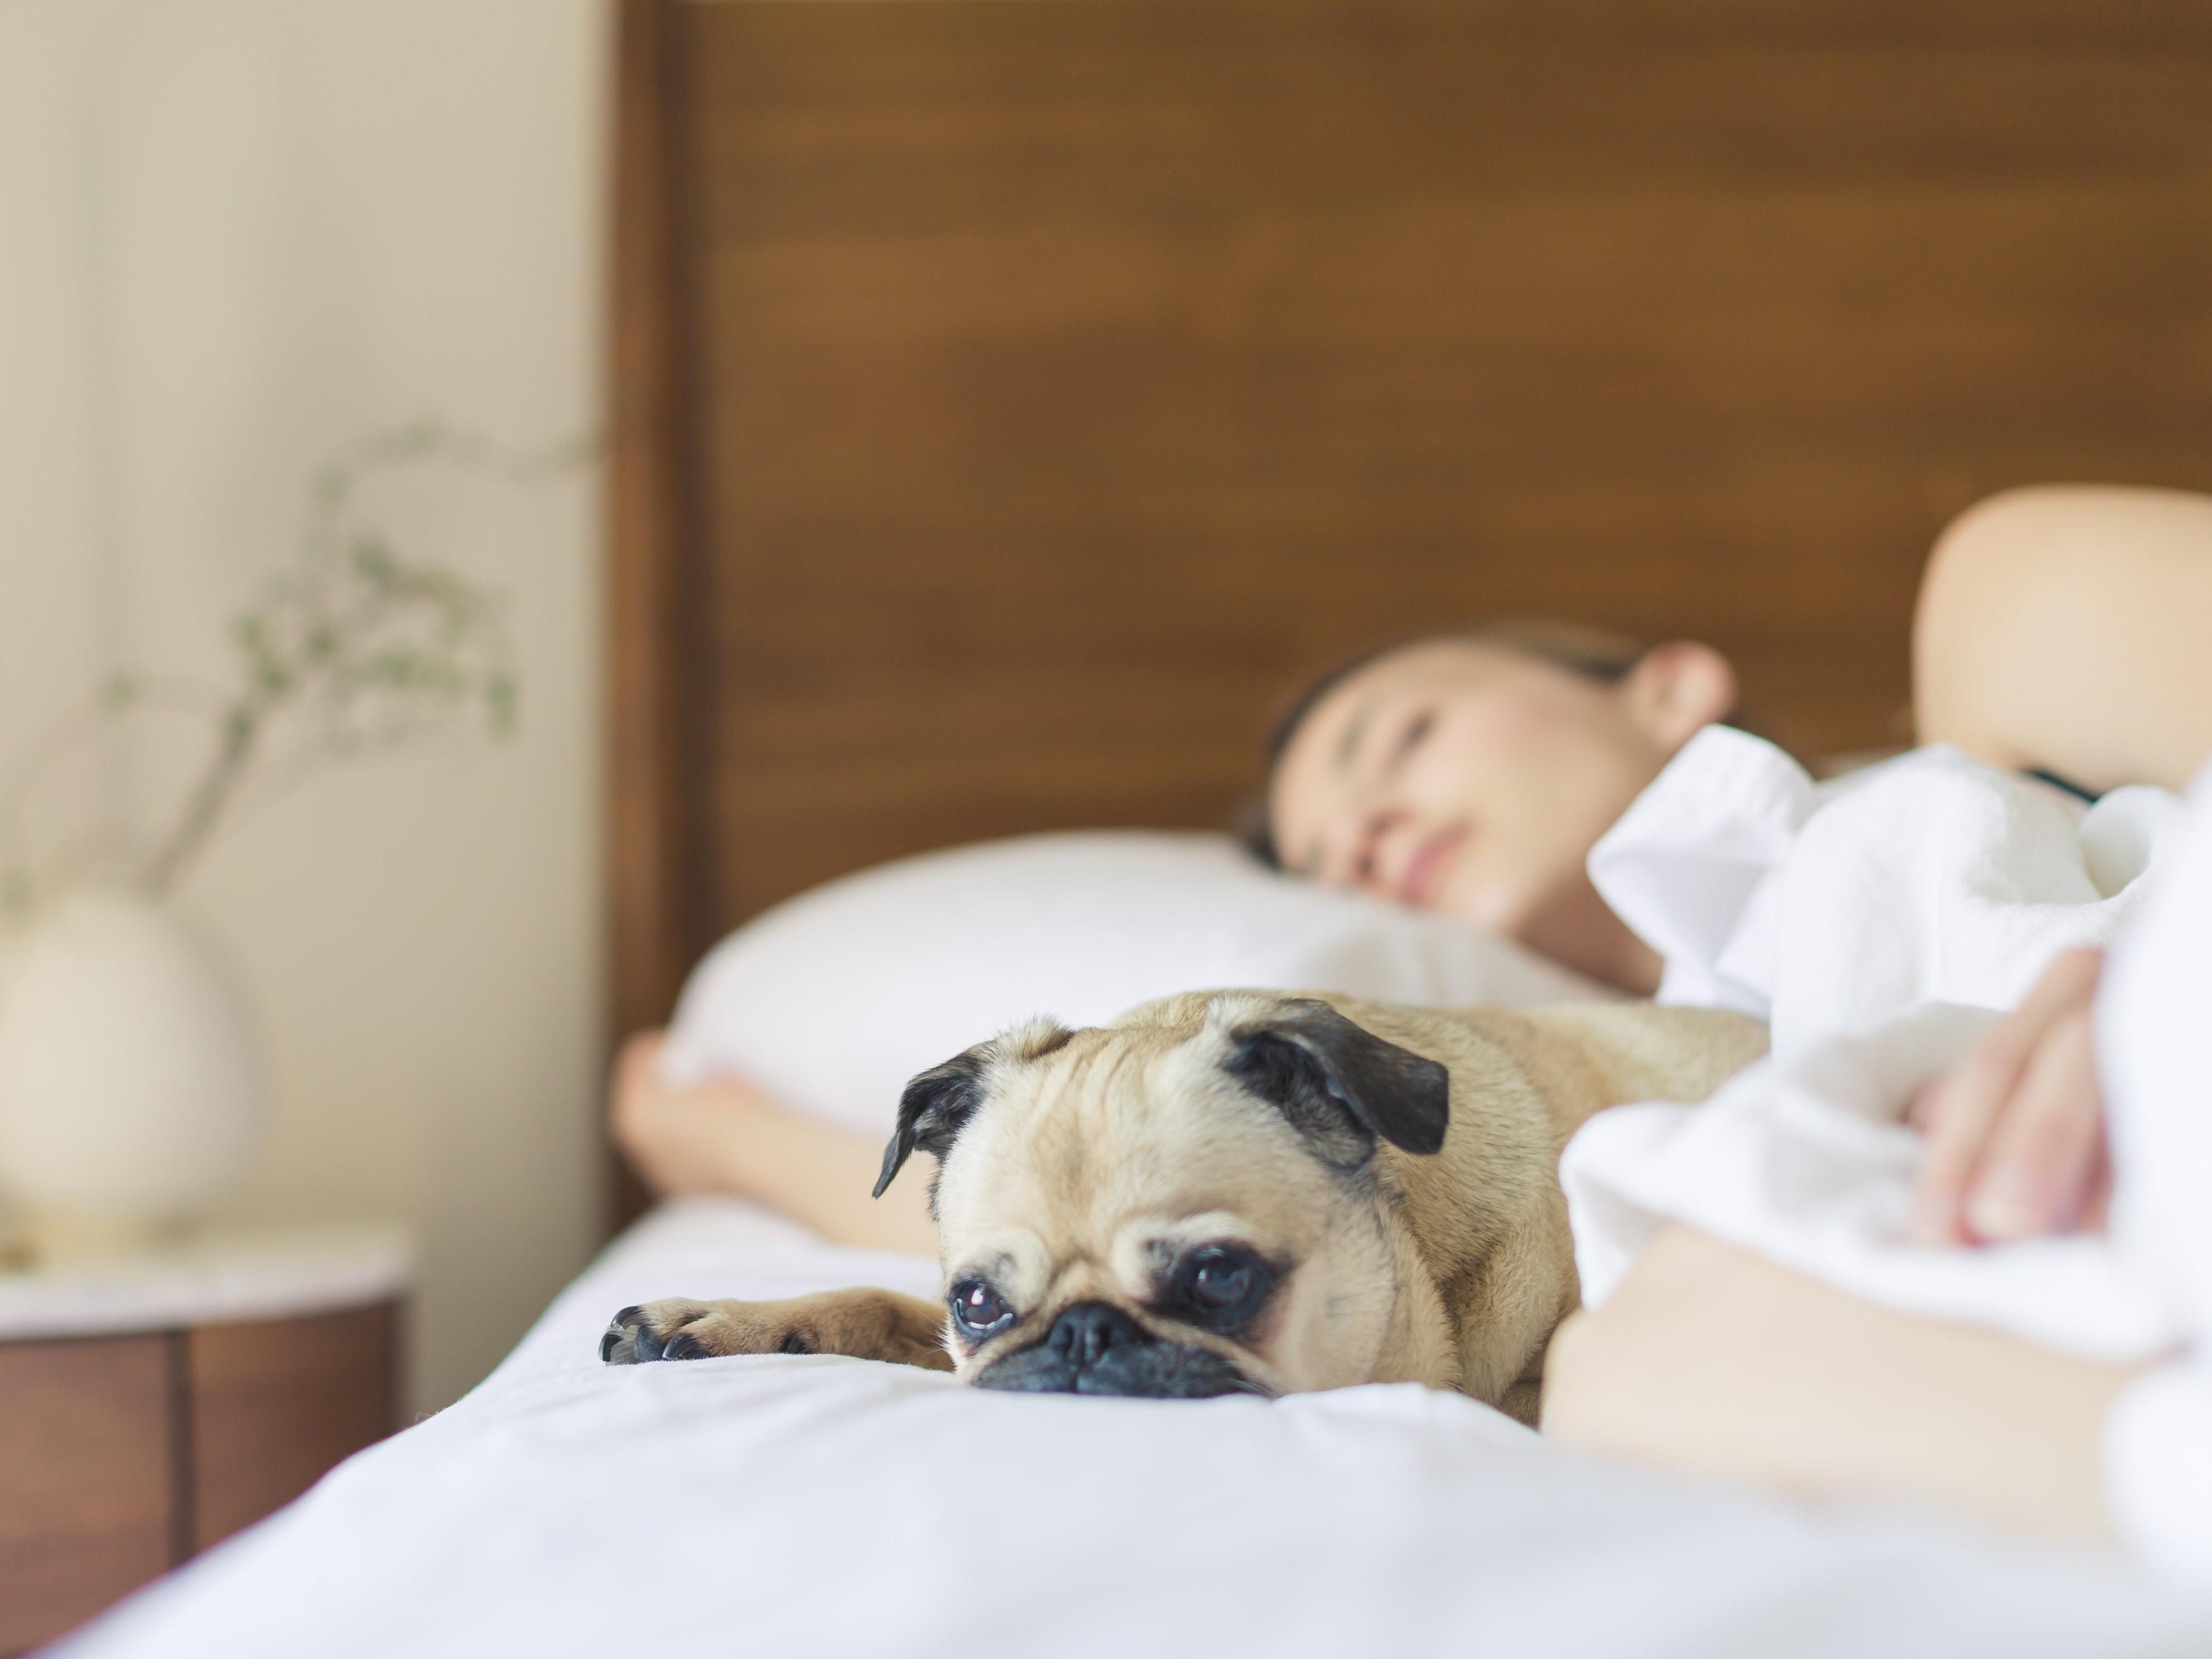 Our hotel is dog friendly, so don't forget to bring your four-legged family member. The hotel accepts up to two 25 pound dogs per room for just $35 per night.